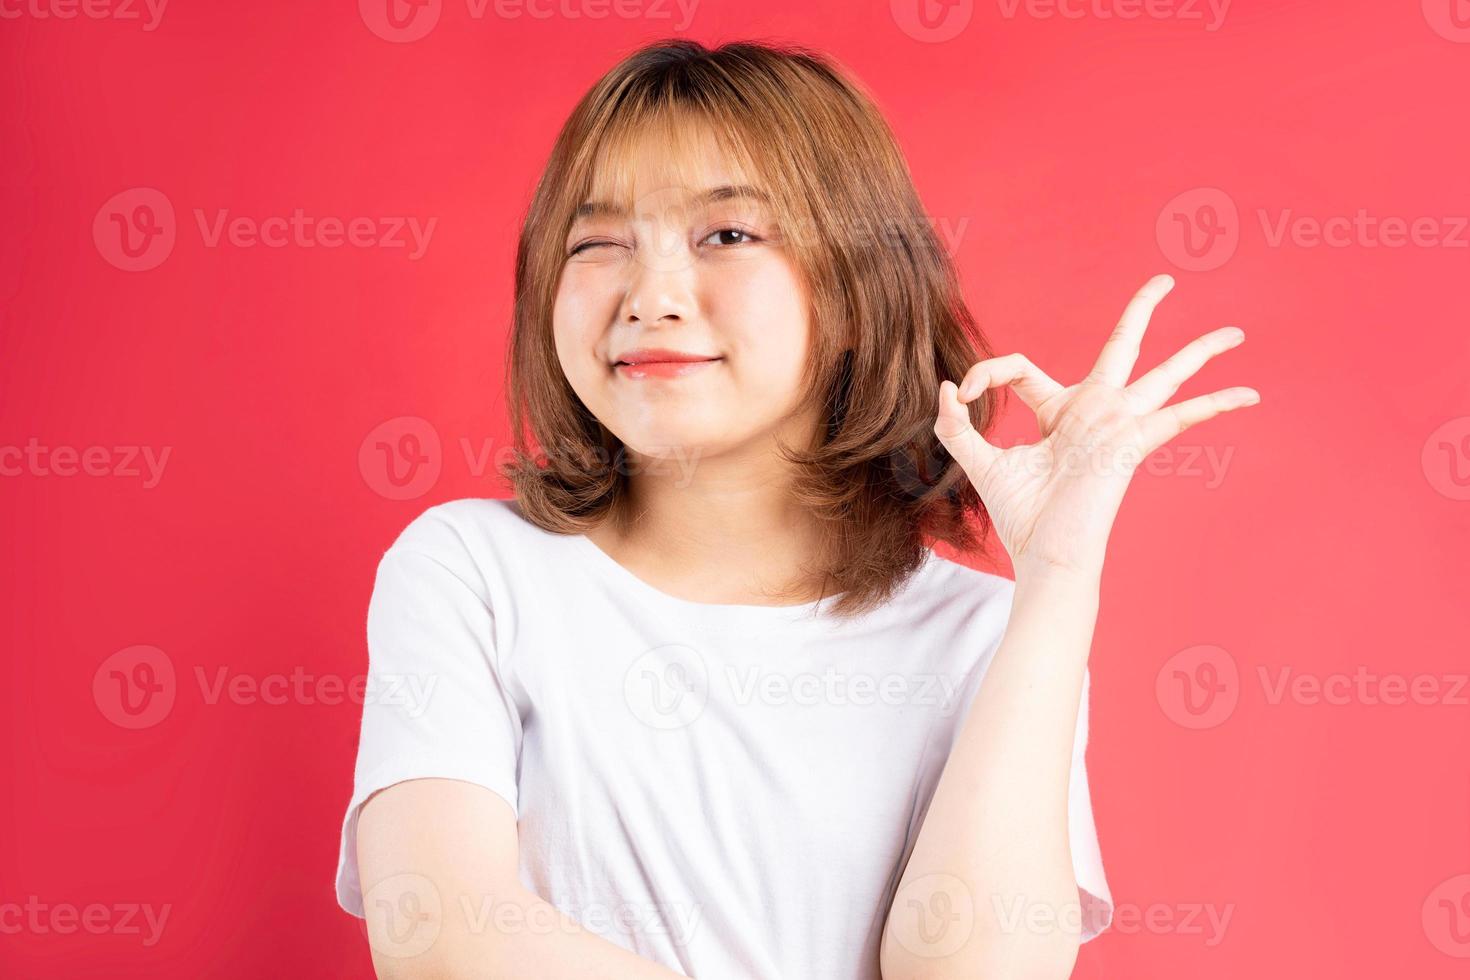 Young Asian girl with cheerful gestures and expressions on background photo